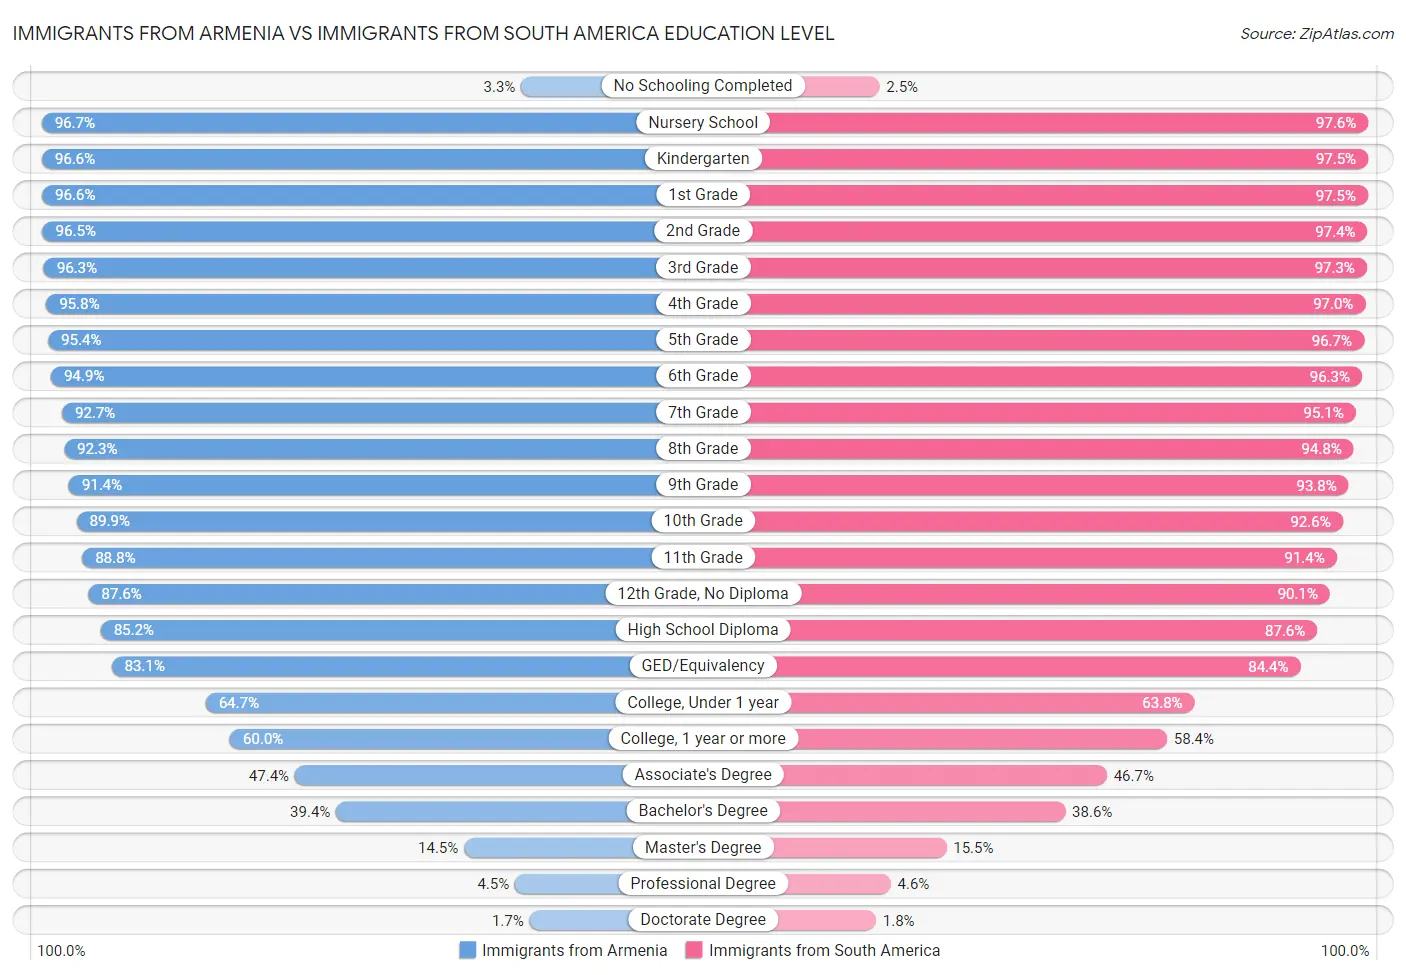 Immigrants from Armenia vs Immigrants from South America Education Level